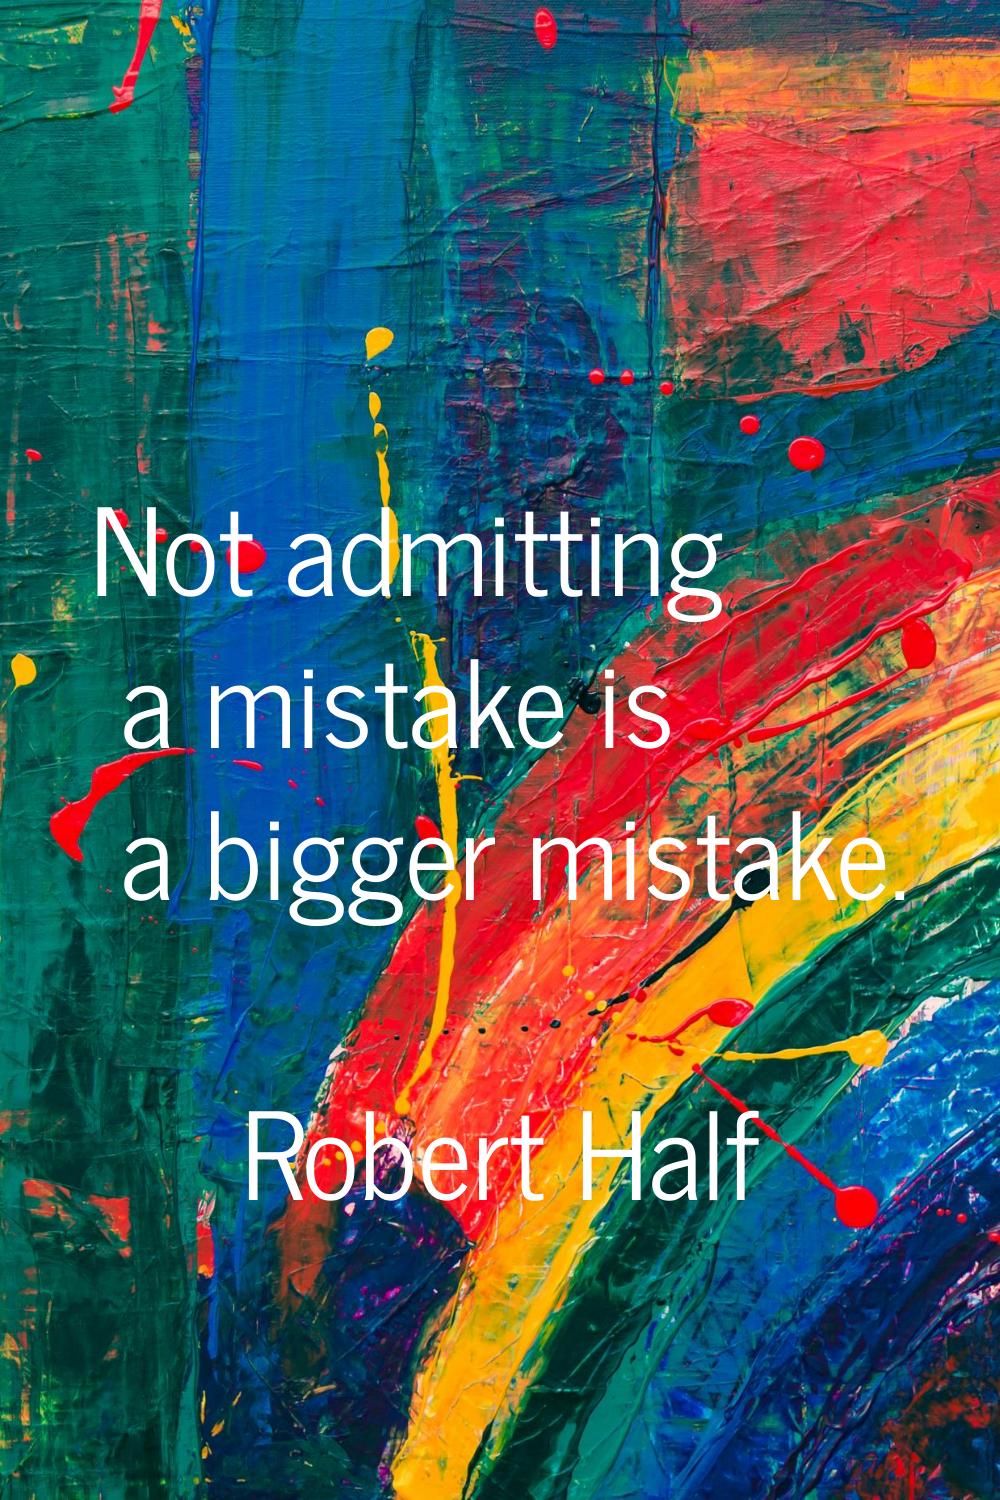 Not admitting a mistake is a bigger mistake.